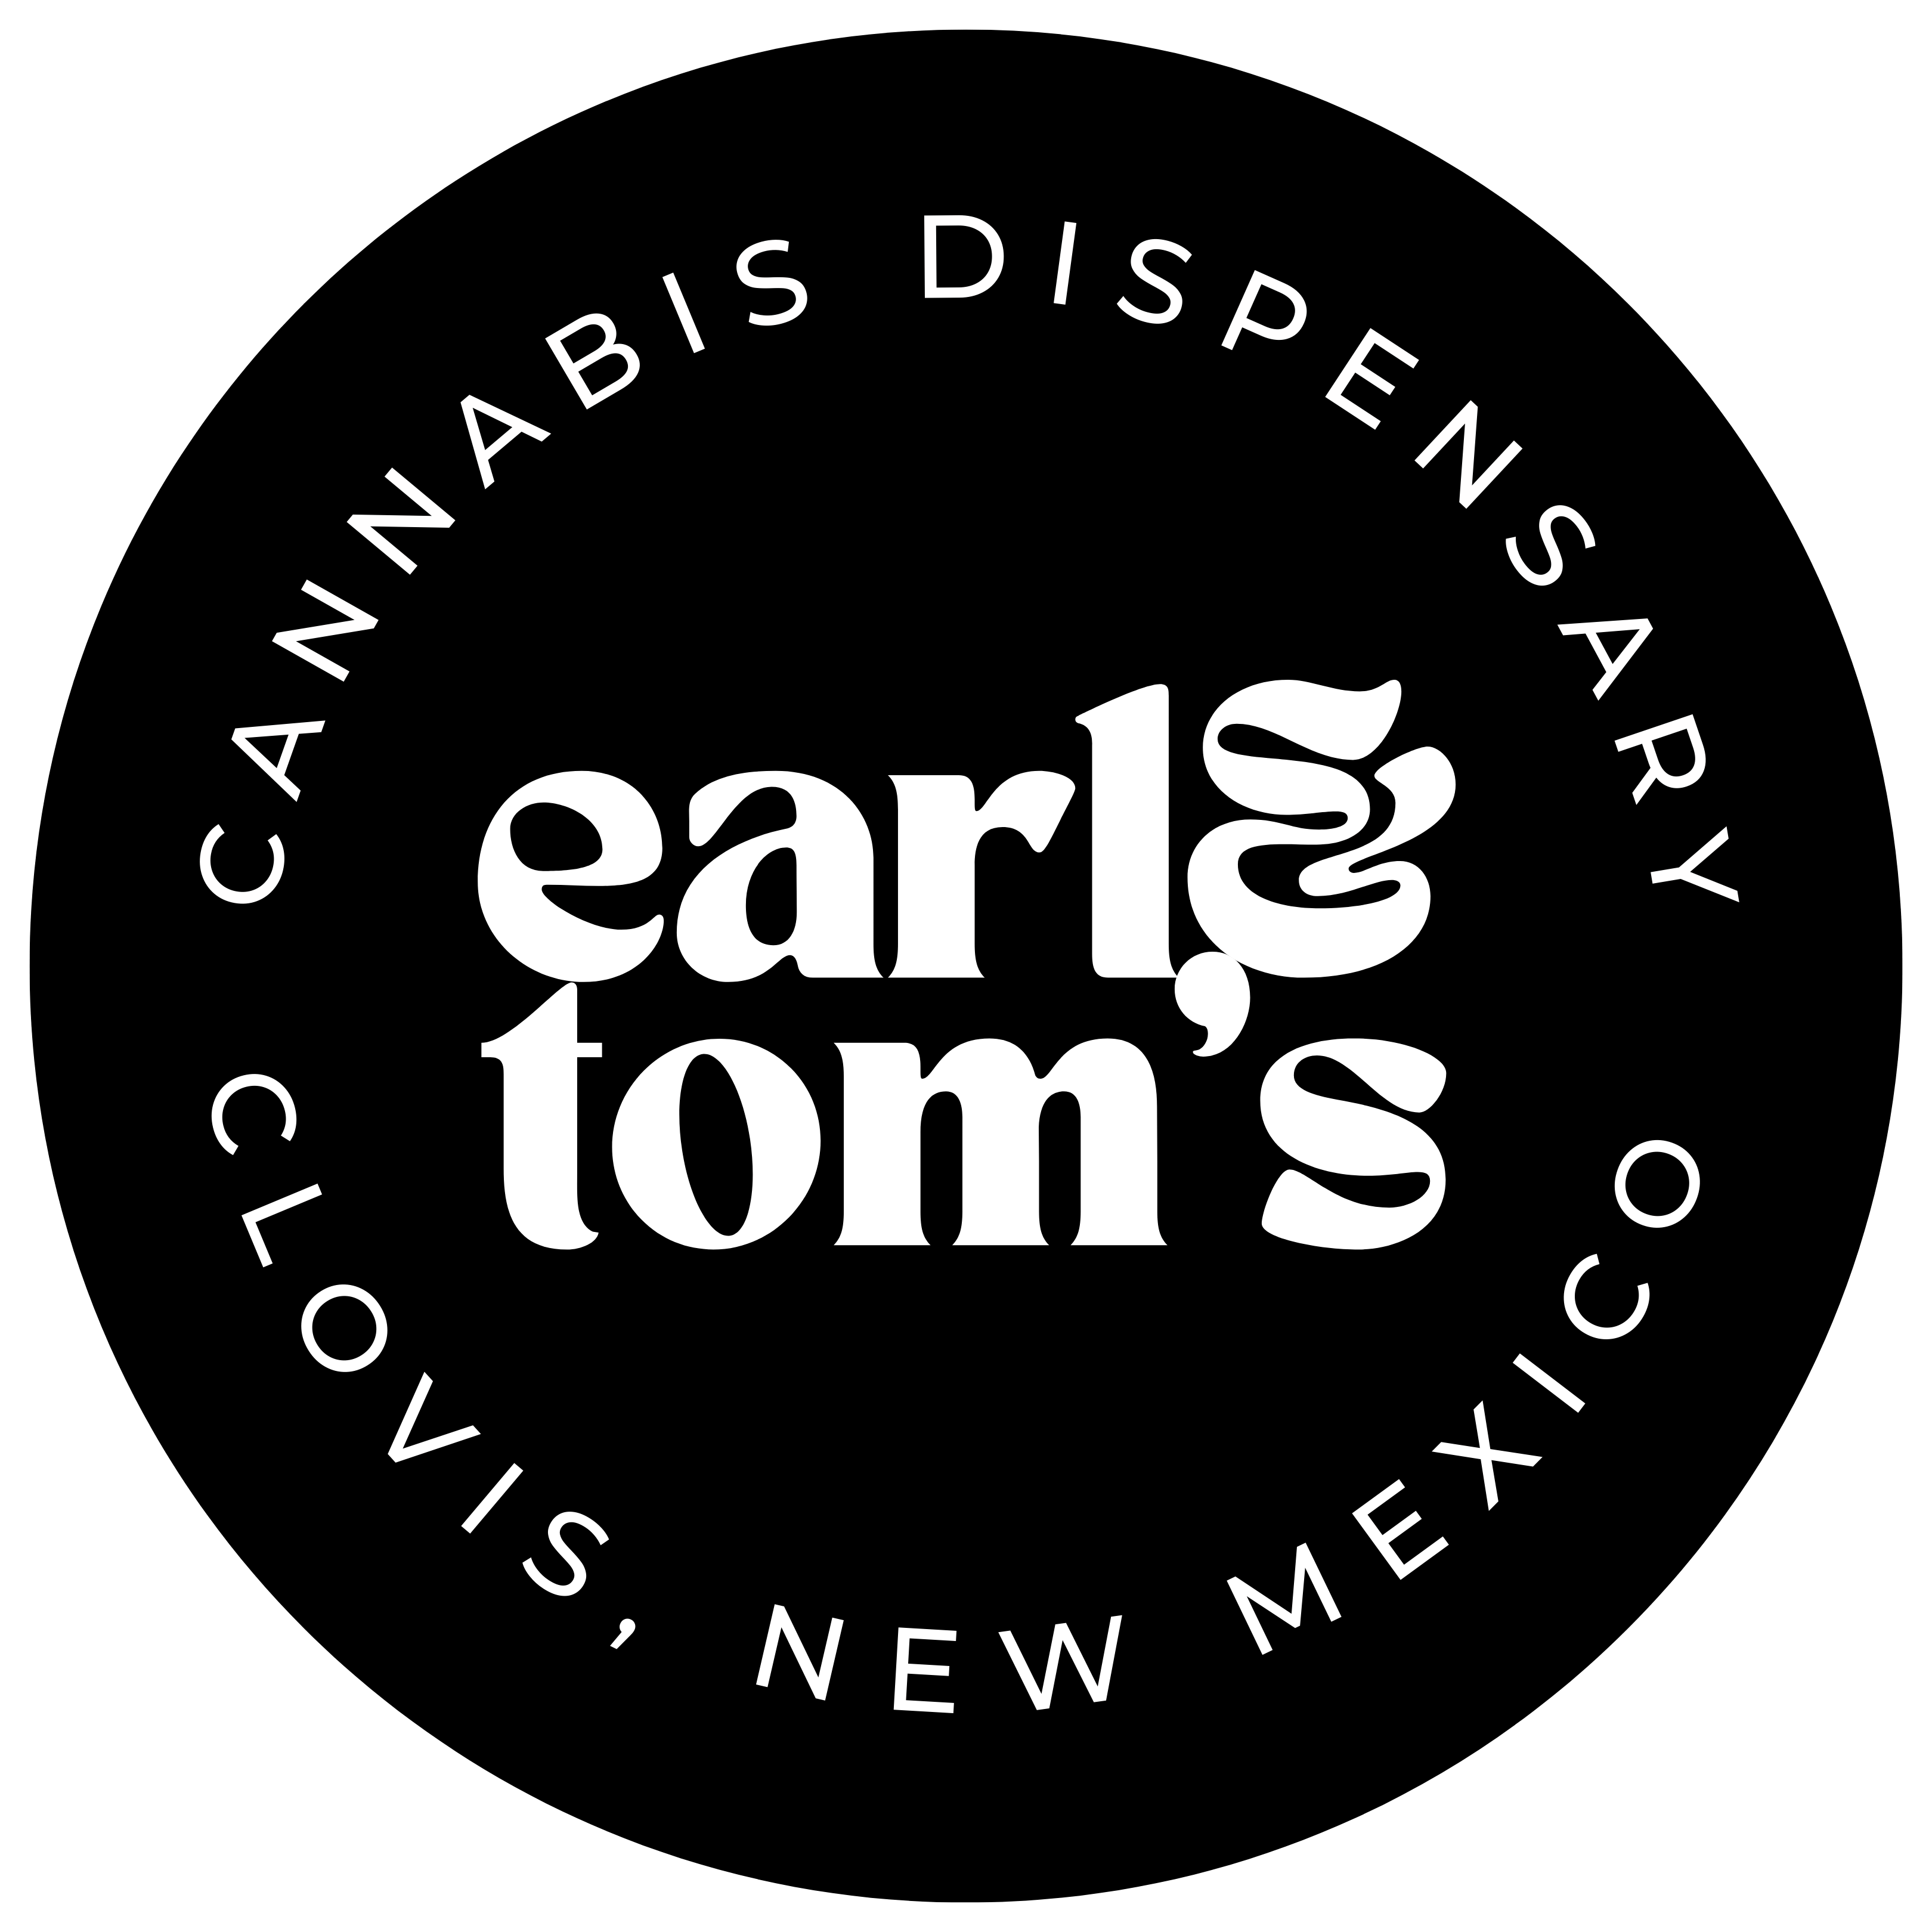 Earl and Tom's logo